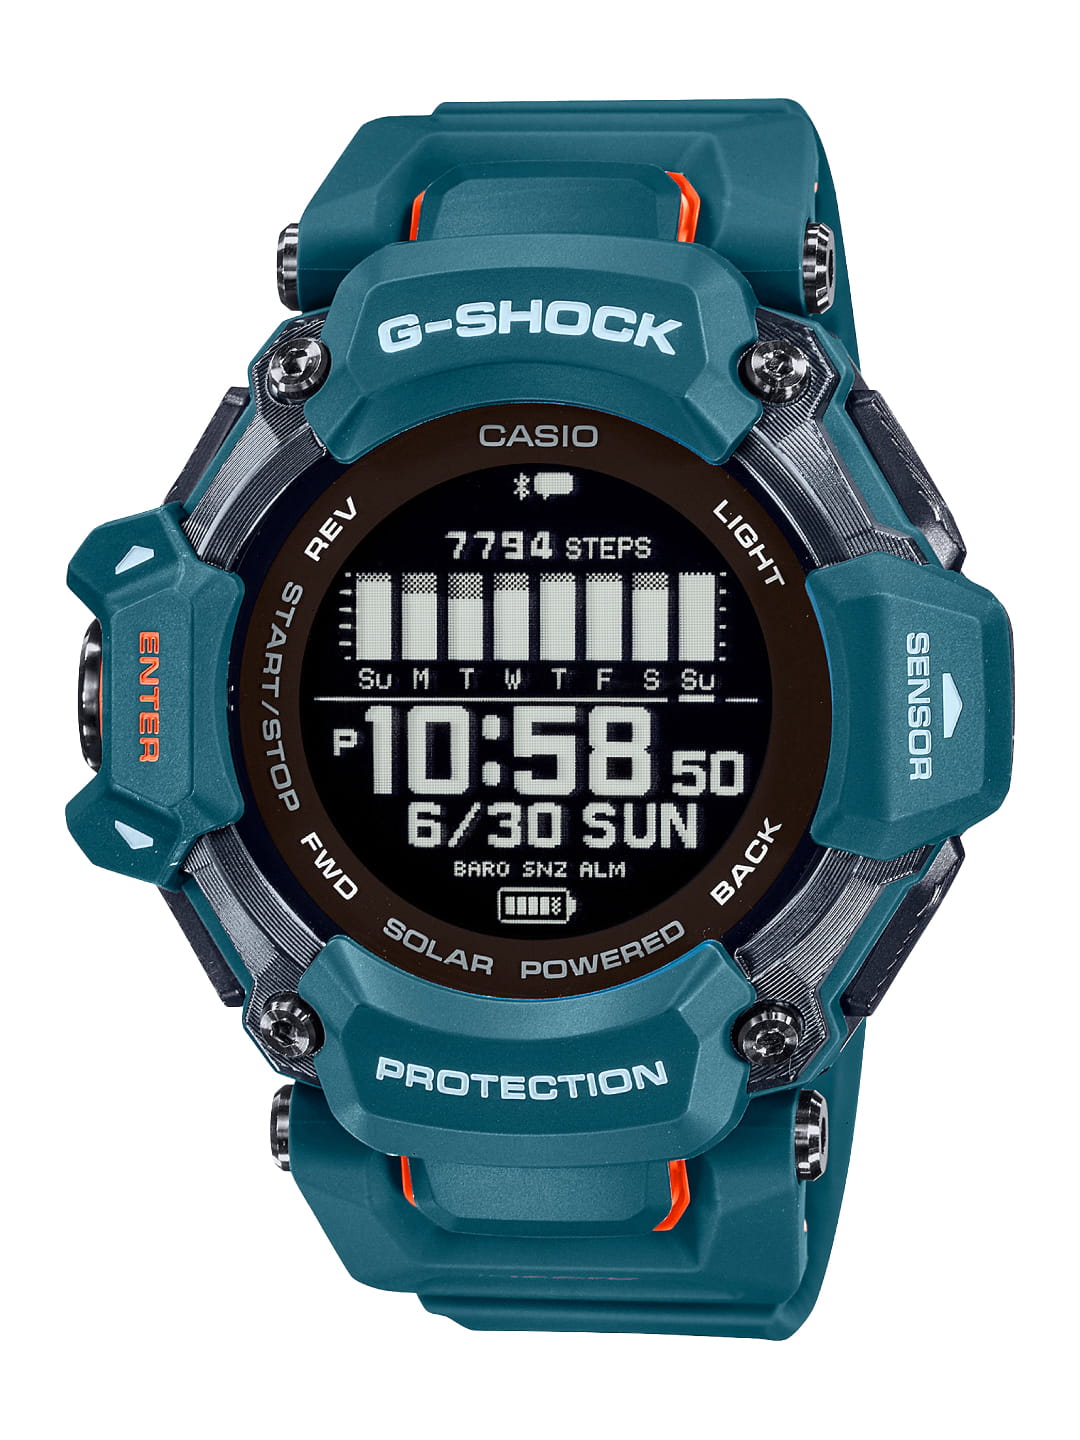 Casio launches new Nordic-powered G-SHOCK watch with multiple 